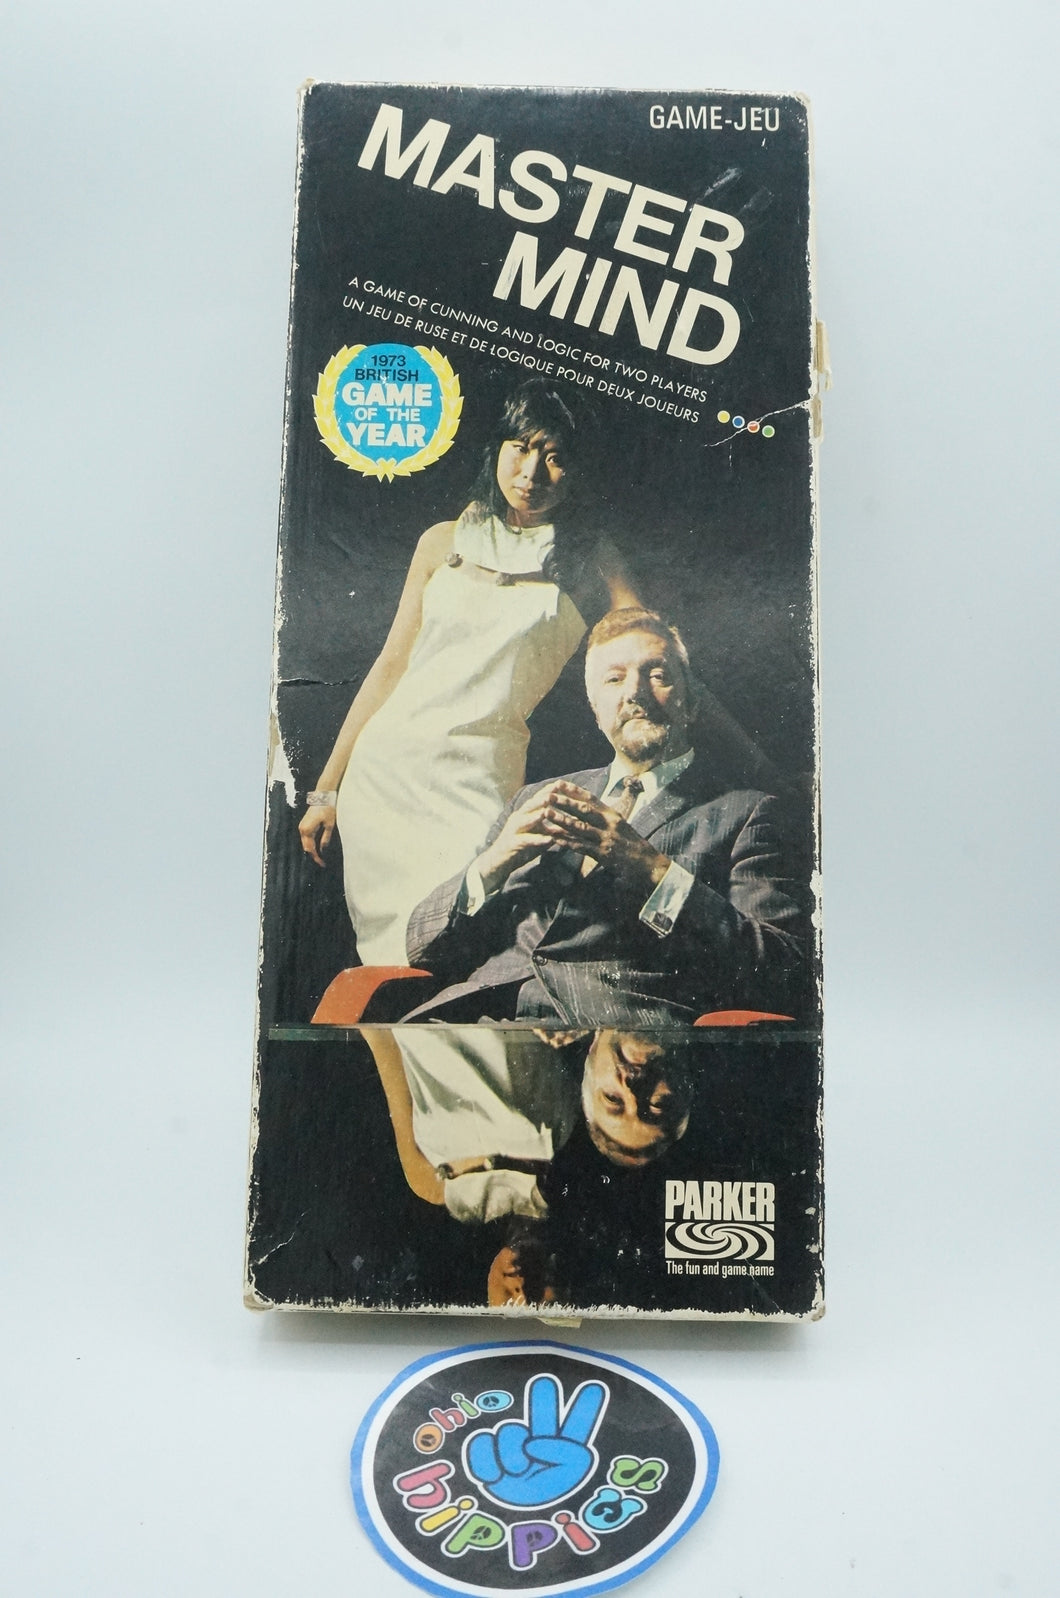 Vintage Master Mind Board Game by Parker - ohiohippiessmokeshop.com